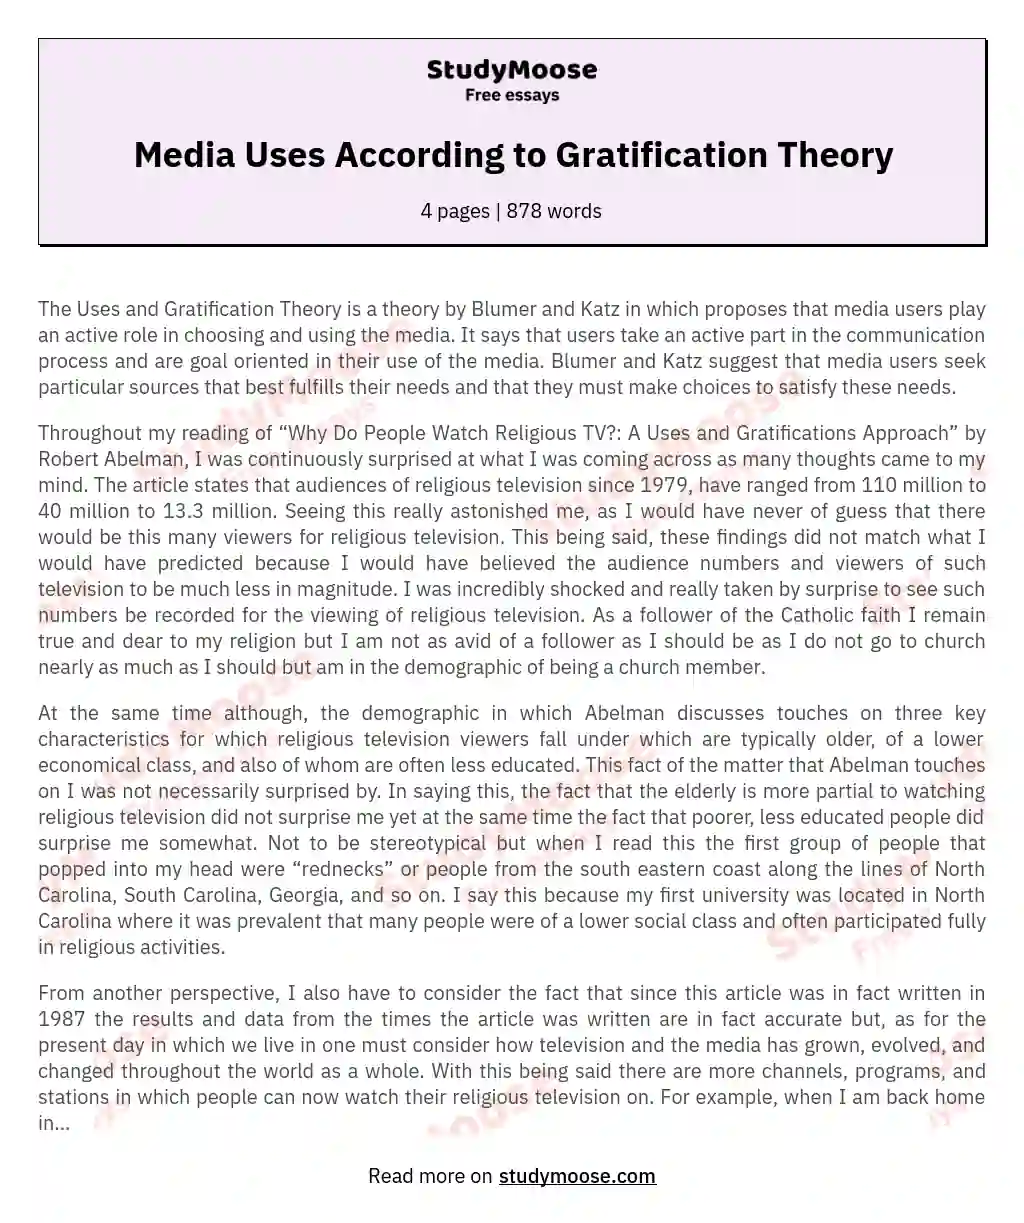 Media Uses According to Gratification Theory